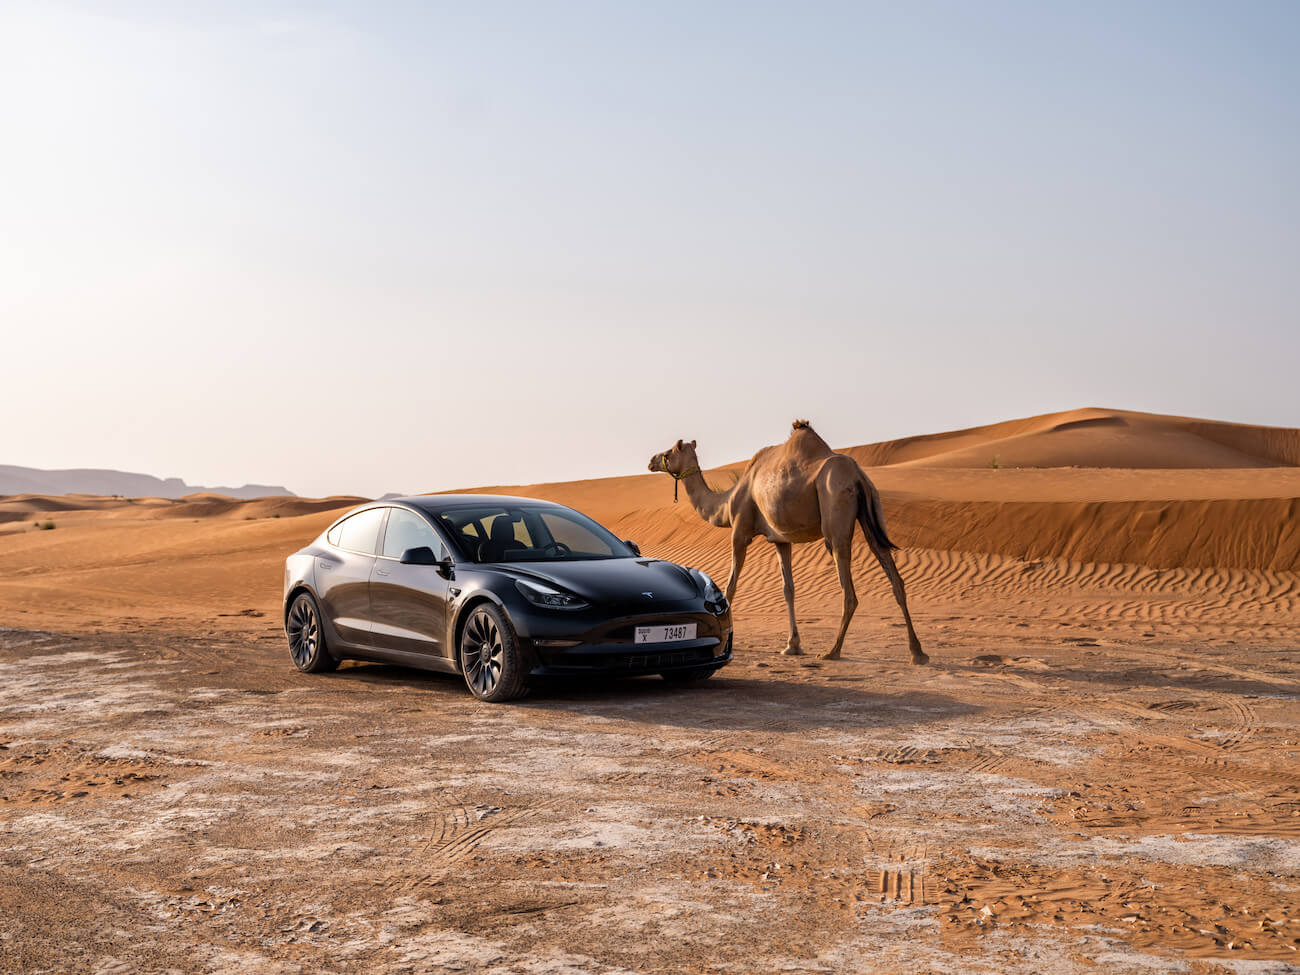 A black Tesla Model 3 next to a camel in the desert. Tesla prices are impacting the market.